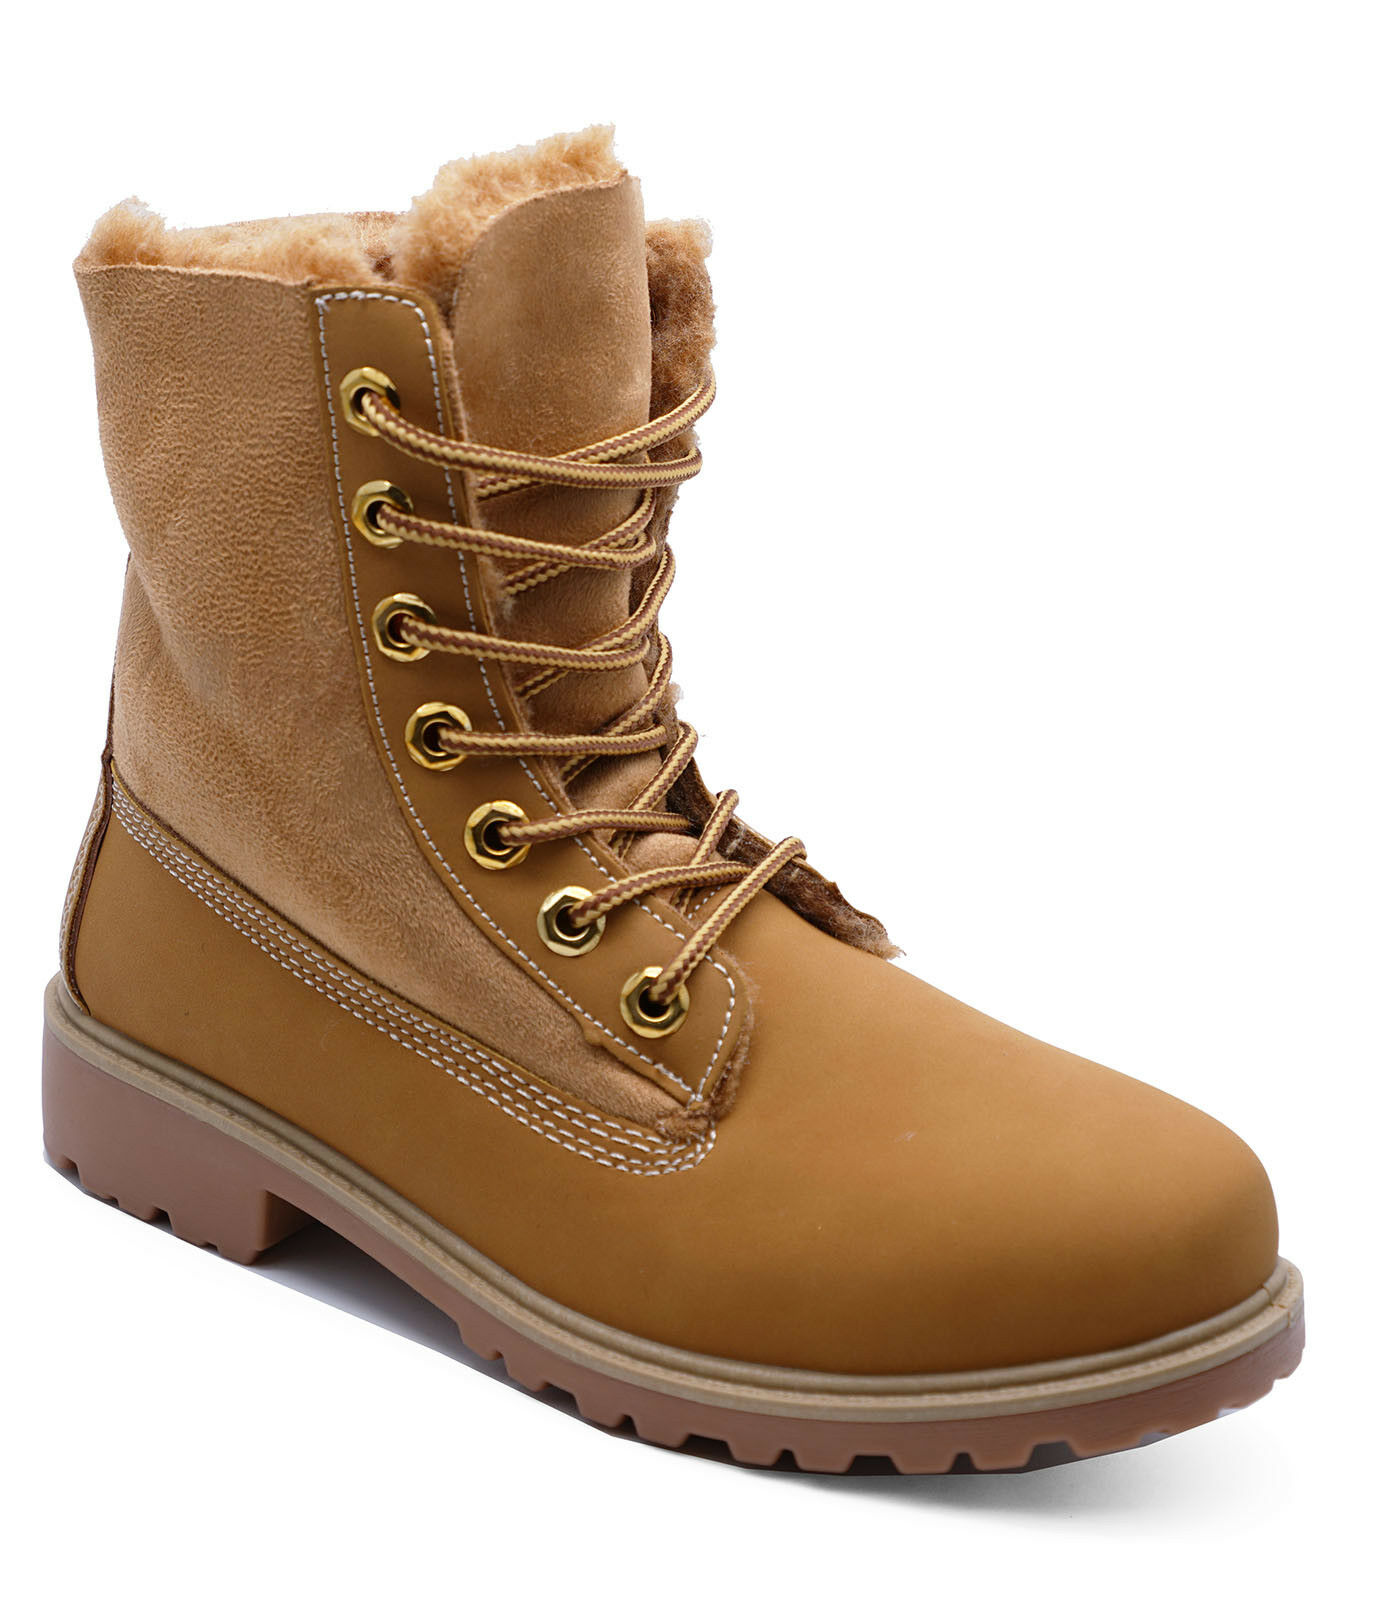 WOMENS TAN LACE-UP HIKING WALKING WARM WINTER ANKLE CALF BOOT SHOES UK 3-8